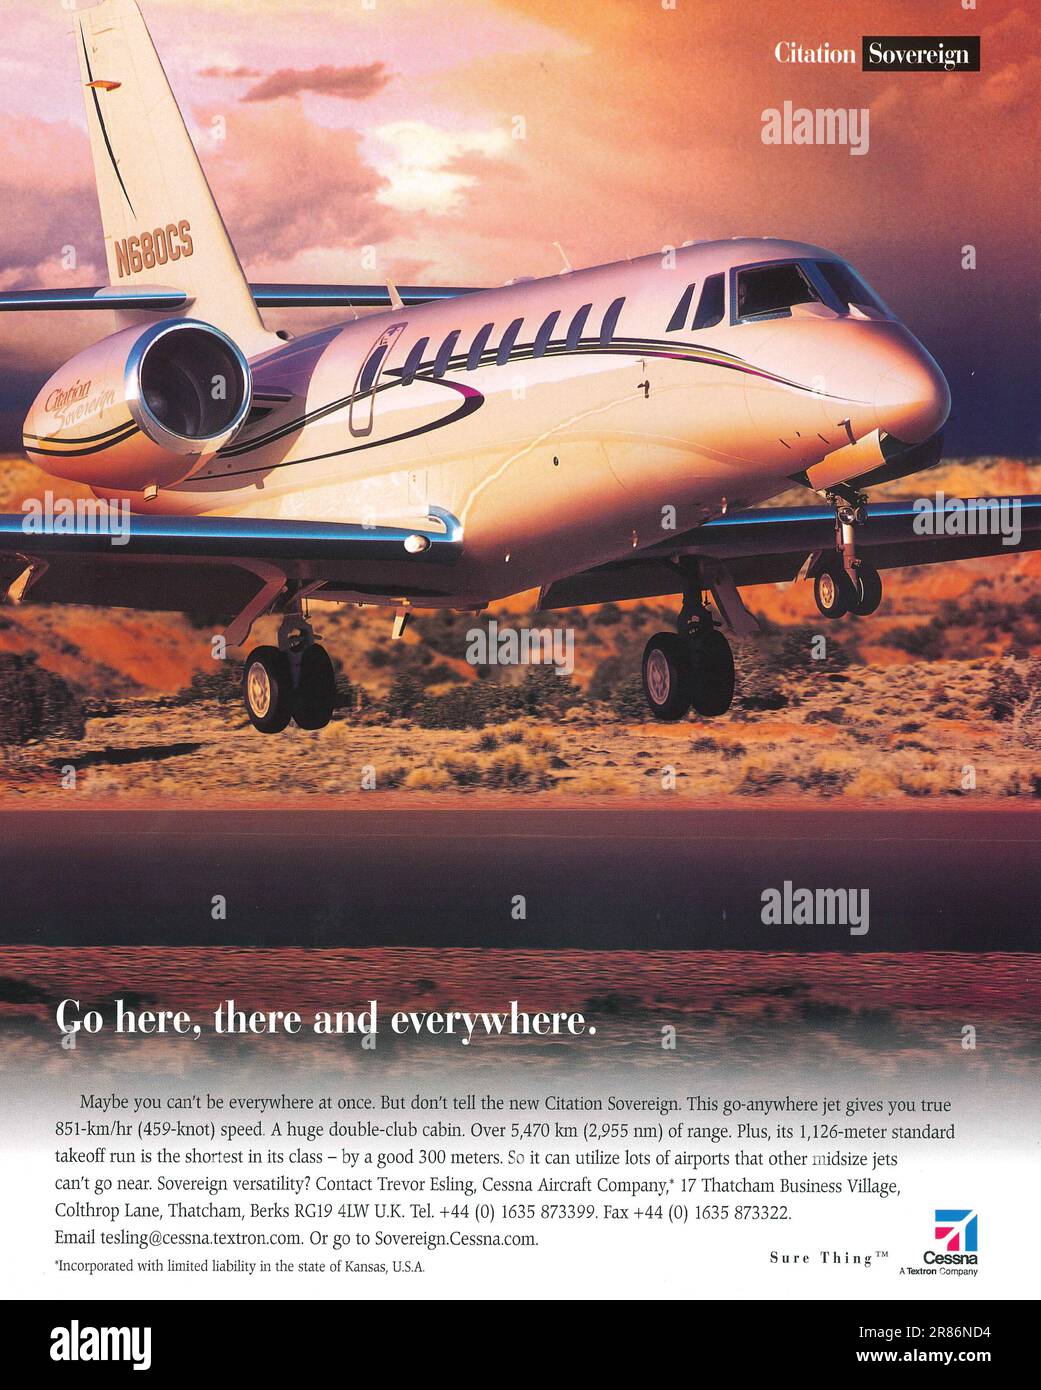 Cessna Citation Sovereign jets advert in a Collections magazine 2014 Stock Photo